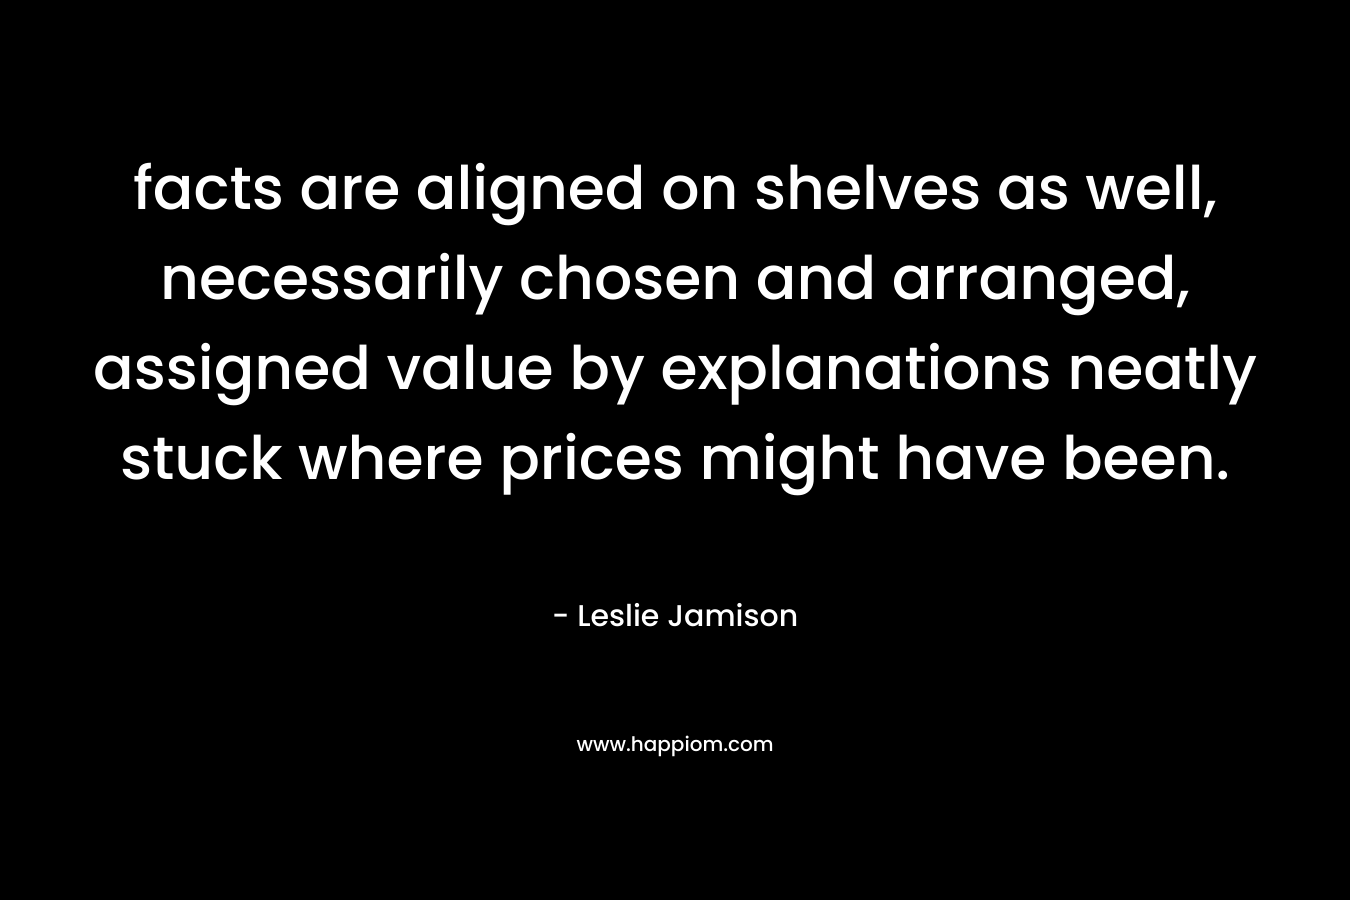 facts are aligned on shelves as well, necessarily chosen and arranged, assigned value by explanations neatly stuck where prices might have been. – Leslie Jamison